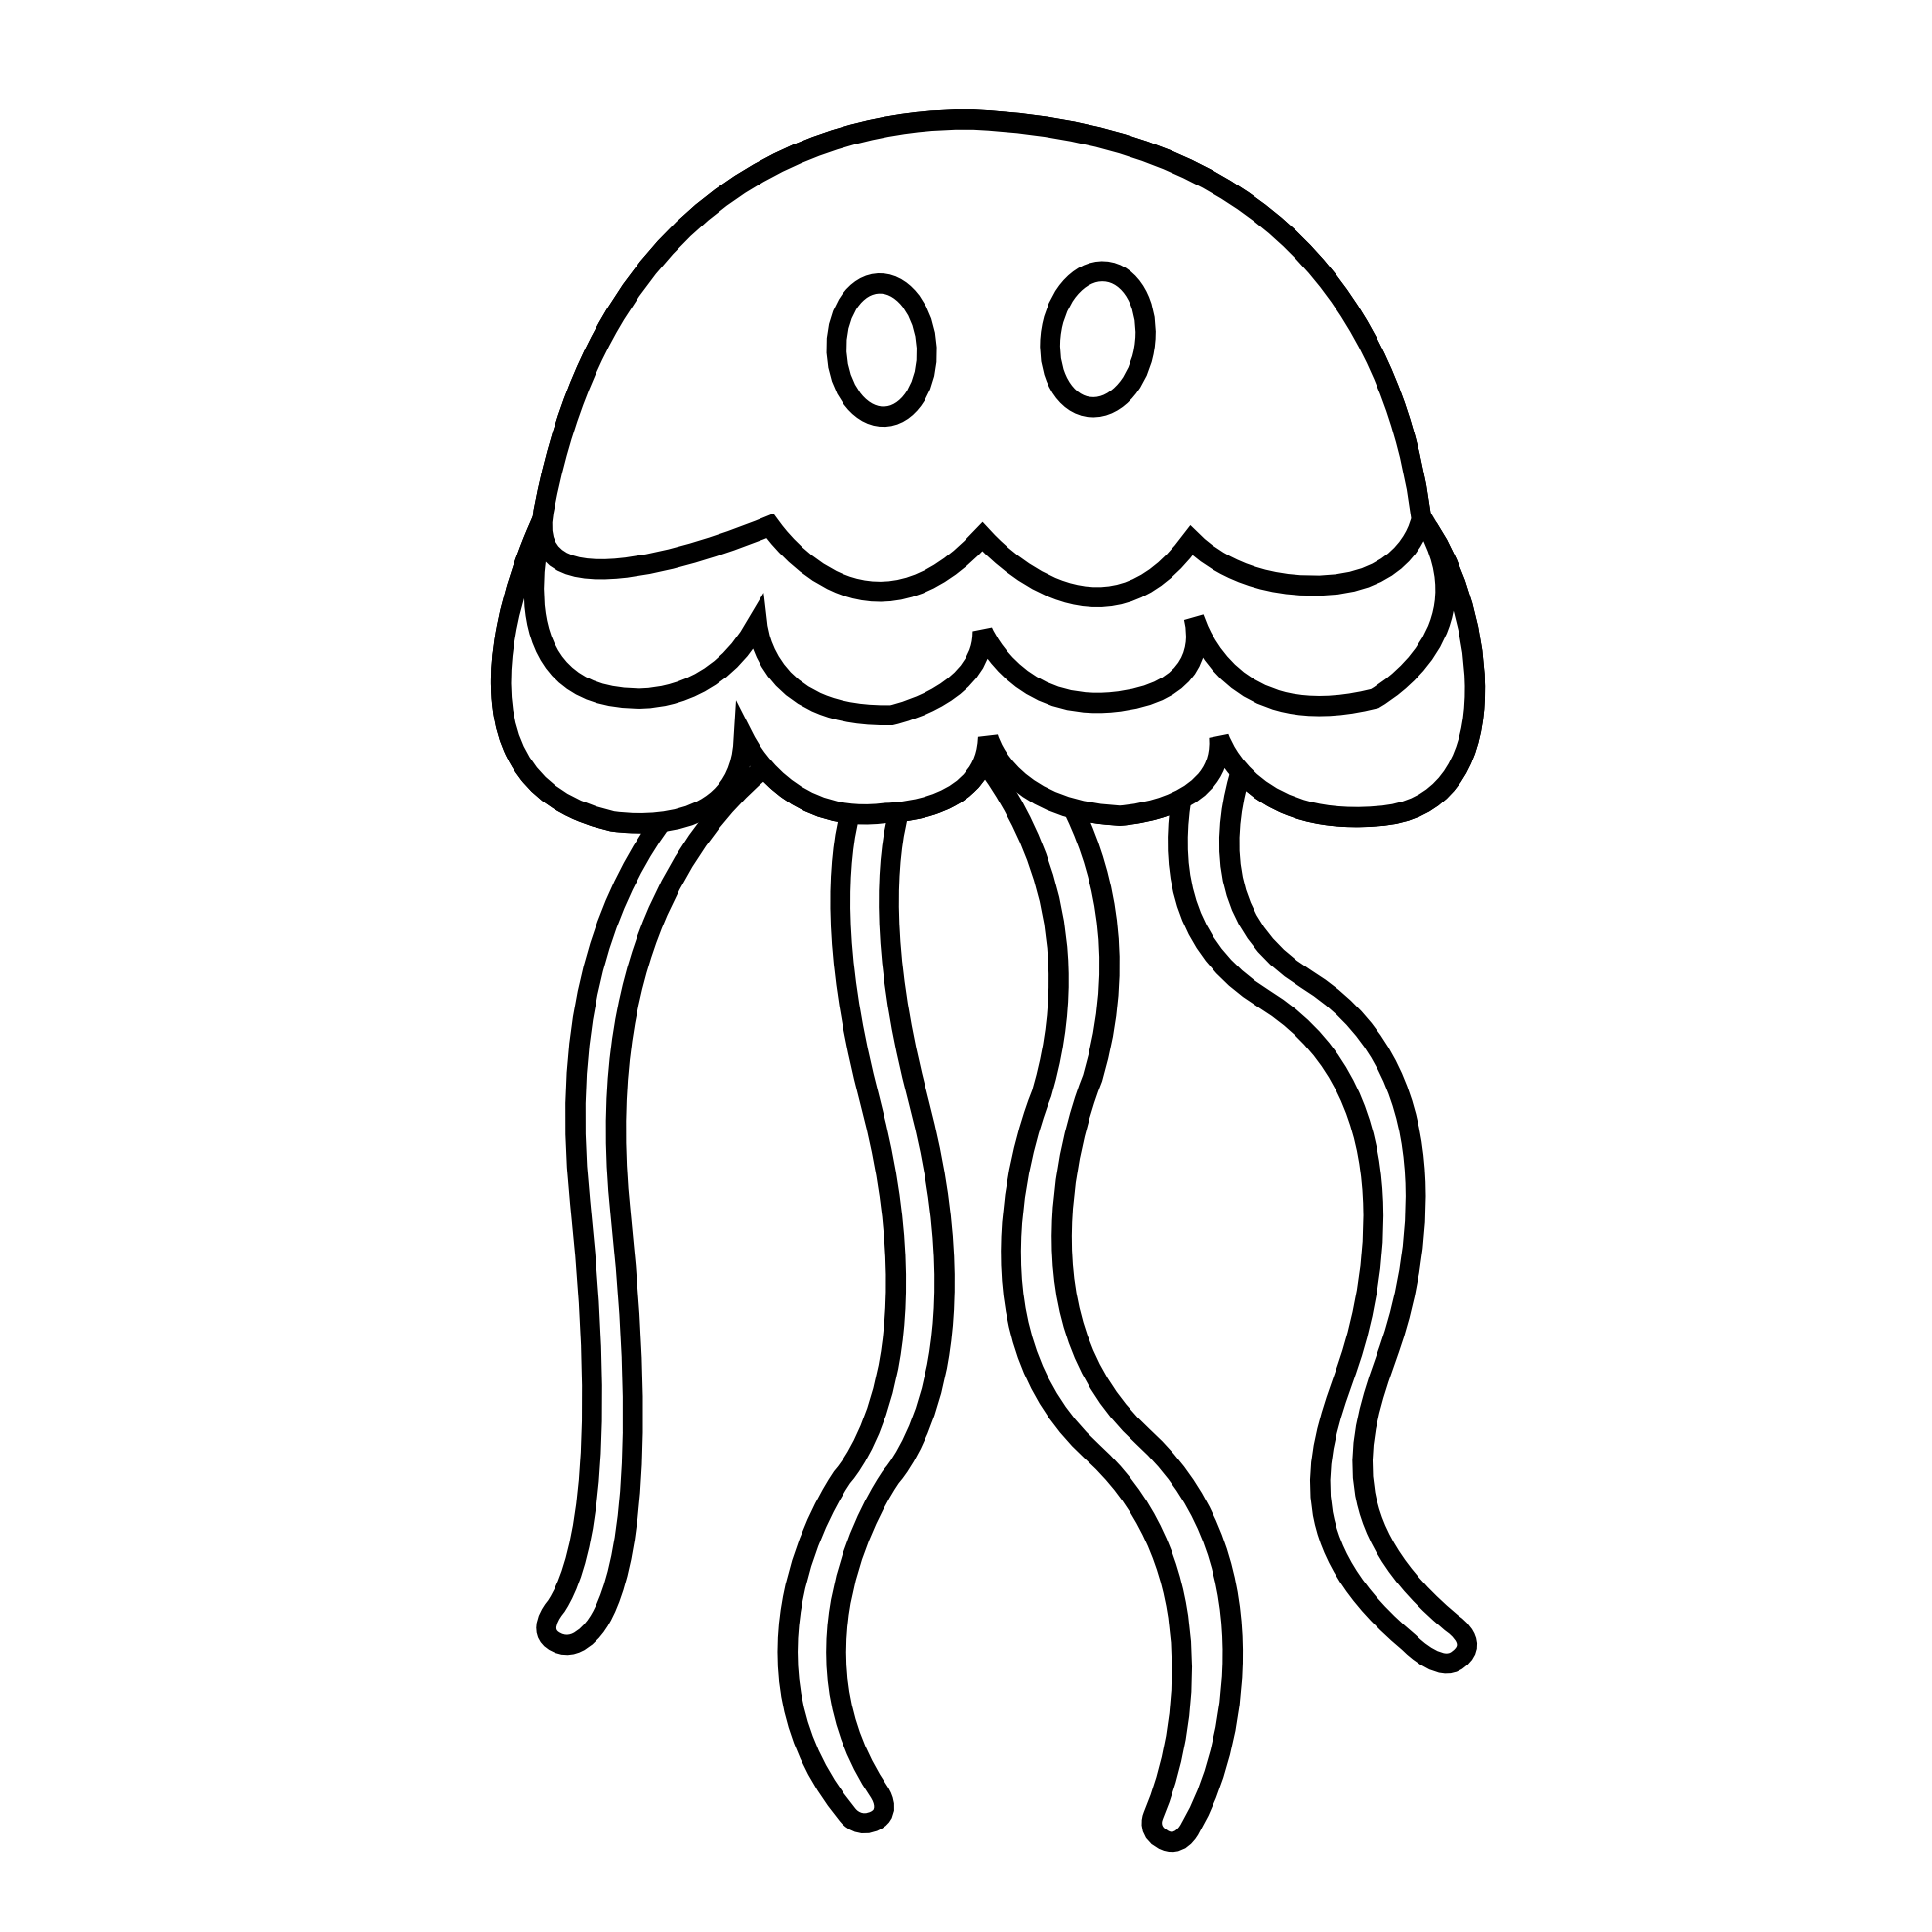 Jellyfish Black White Line | Clipart Panda - Free Clipart Images